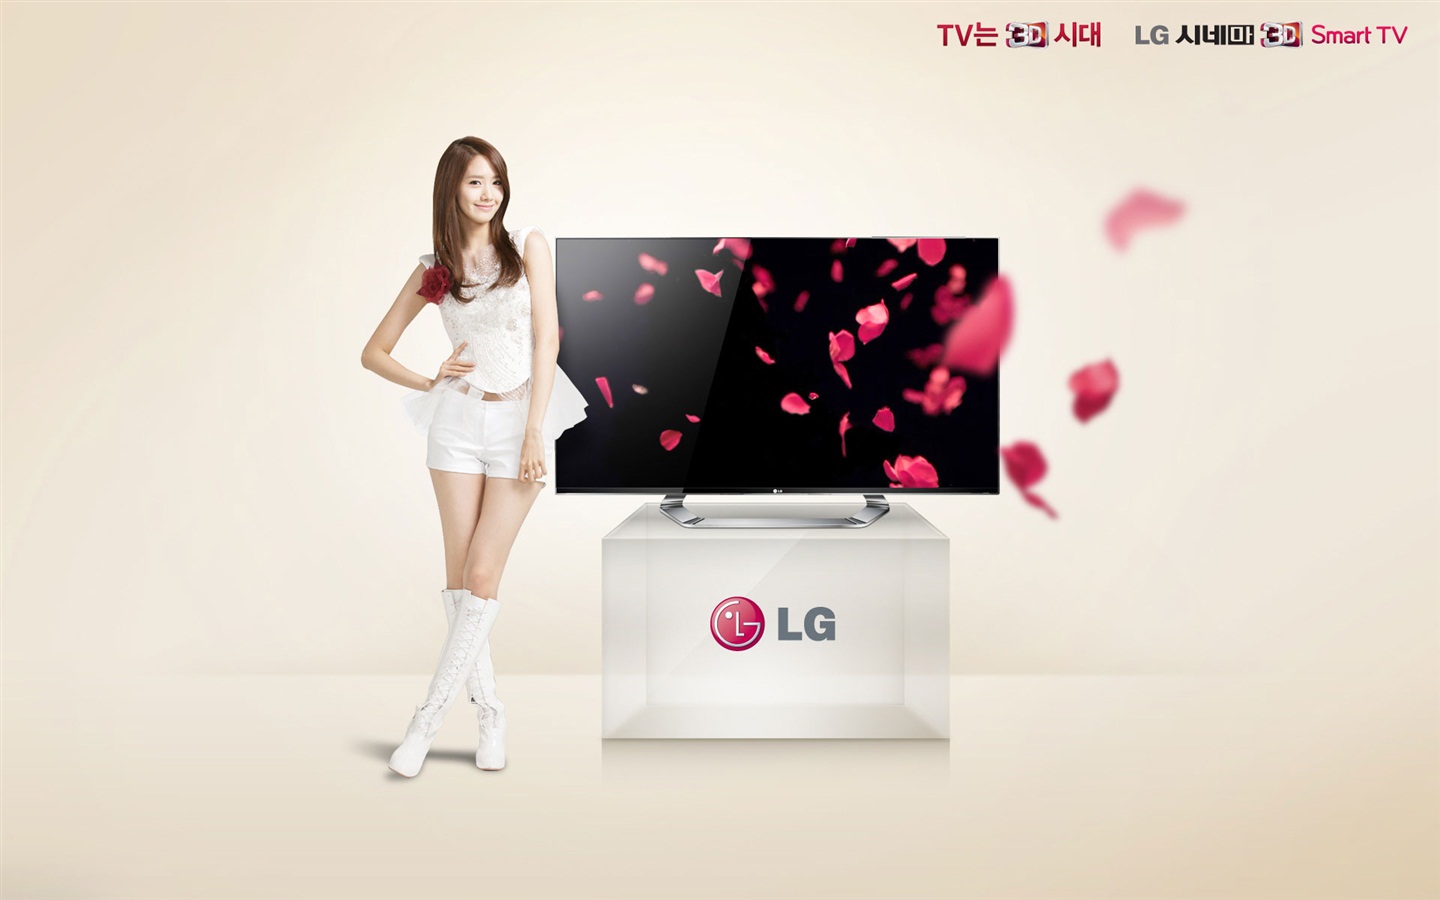 Girls Generation ACE and LG endorsements ads HD wallpapers #20 - 1440x900